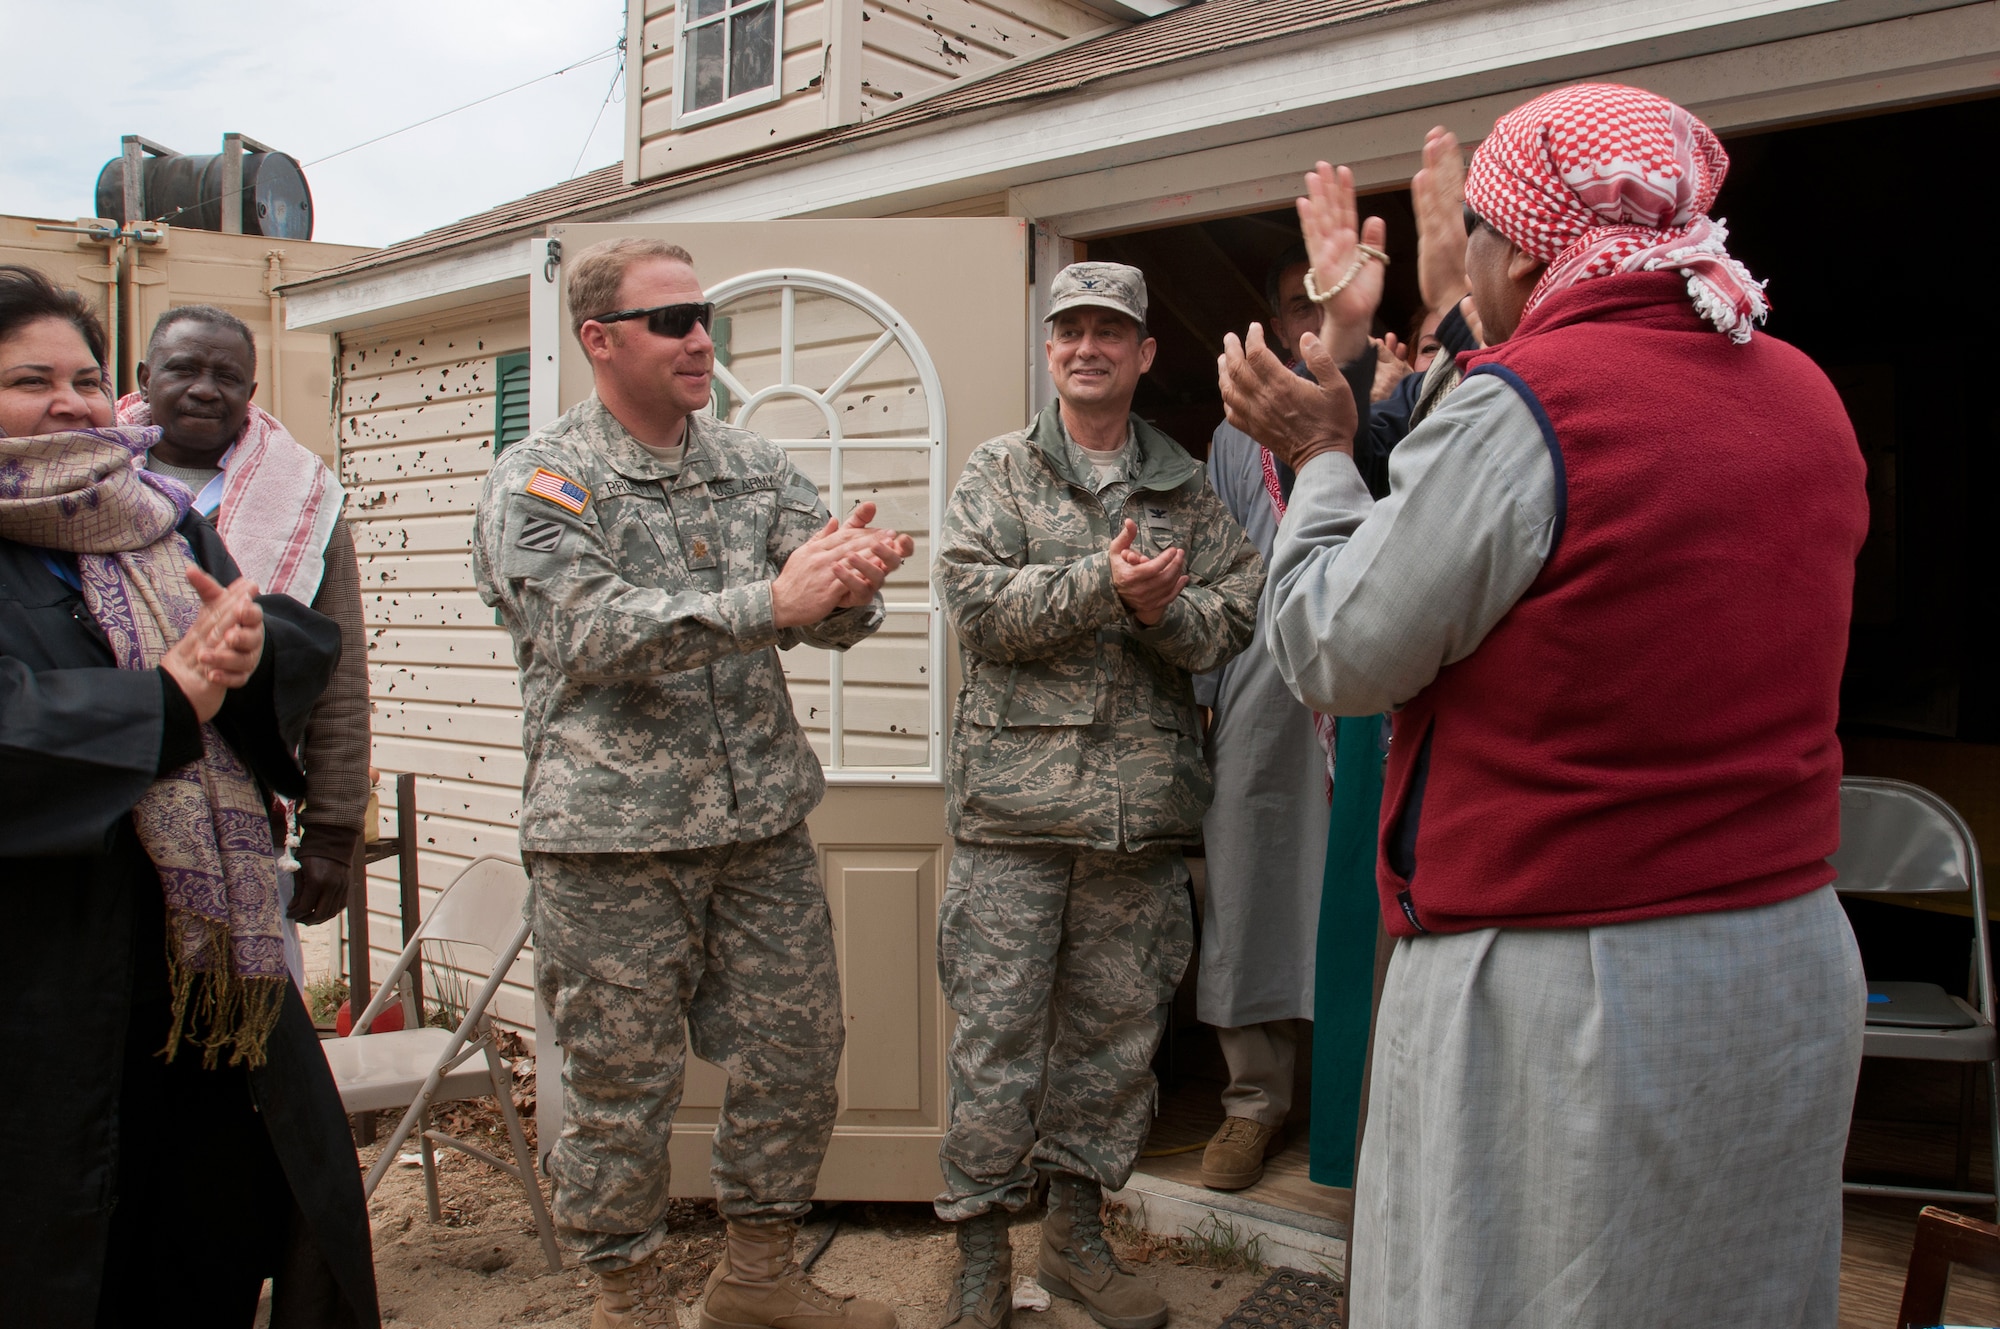 Role-playing actors give Col. Warren Hurst (center), commander of the Kentucky Air National Guard's 123rd Contingency Response Group, and Army Maj. Keith Pruett, commander of the 690th Rapid Port Opening Element from Fort Eustis, Va., an Arabic welcome to the fictional village of Sabor, Nessor, on March 28, 2012. Both were participating in Eagle Flag, an exercise designed to simulate a deployed environment at Joint Base McGuire-Dix-Lakehurst, N.J. (U.S. Air Force photo by Maj. Dale Greer)